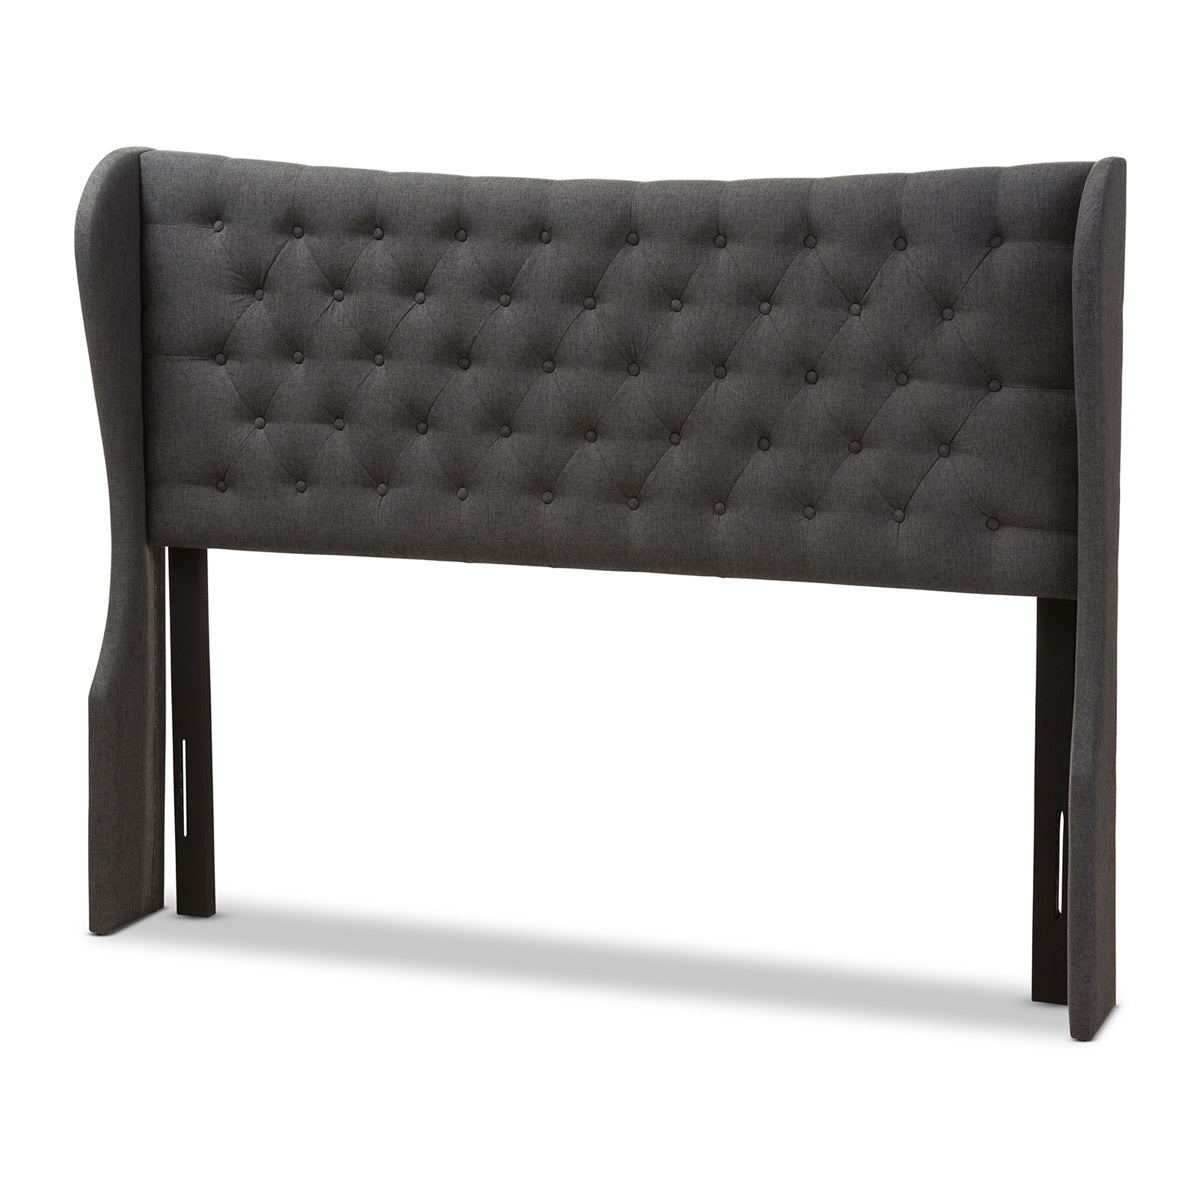 Baxton Studio Cadence Modern and Contemporary Dark Grey Fabric Button-Tufted Full Size Winged Headboard Baxton Studio-Headboards-Minimal And Modern - 1